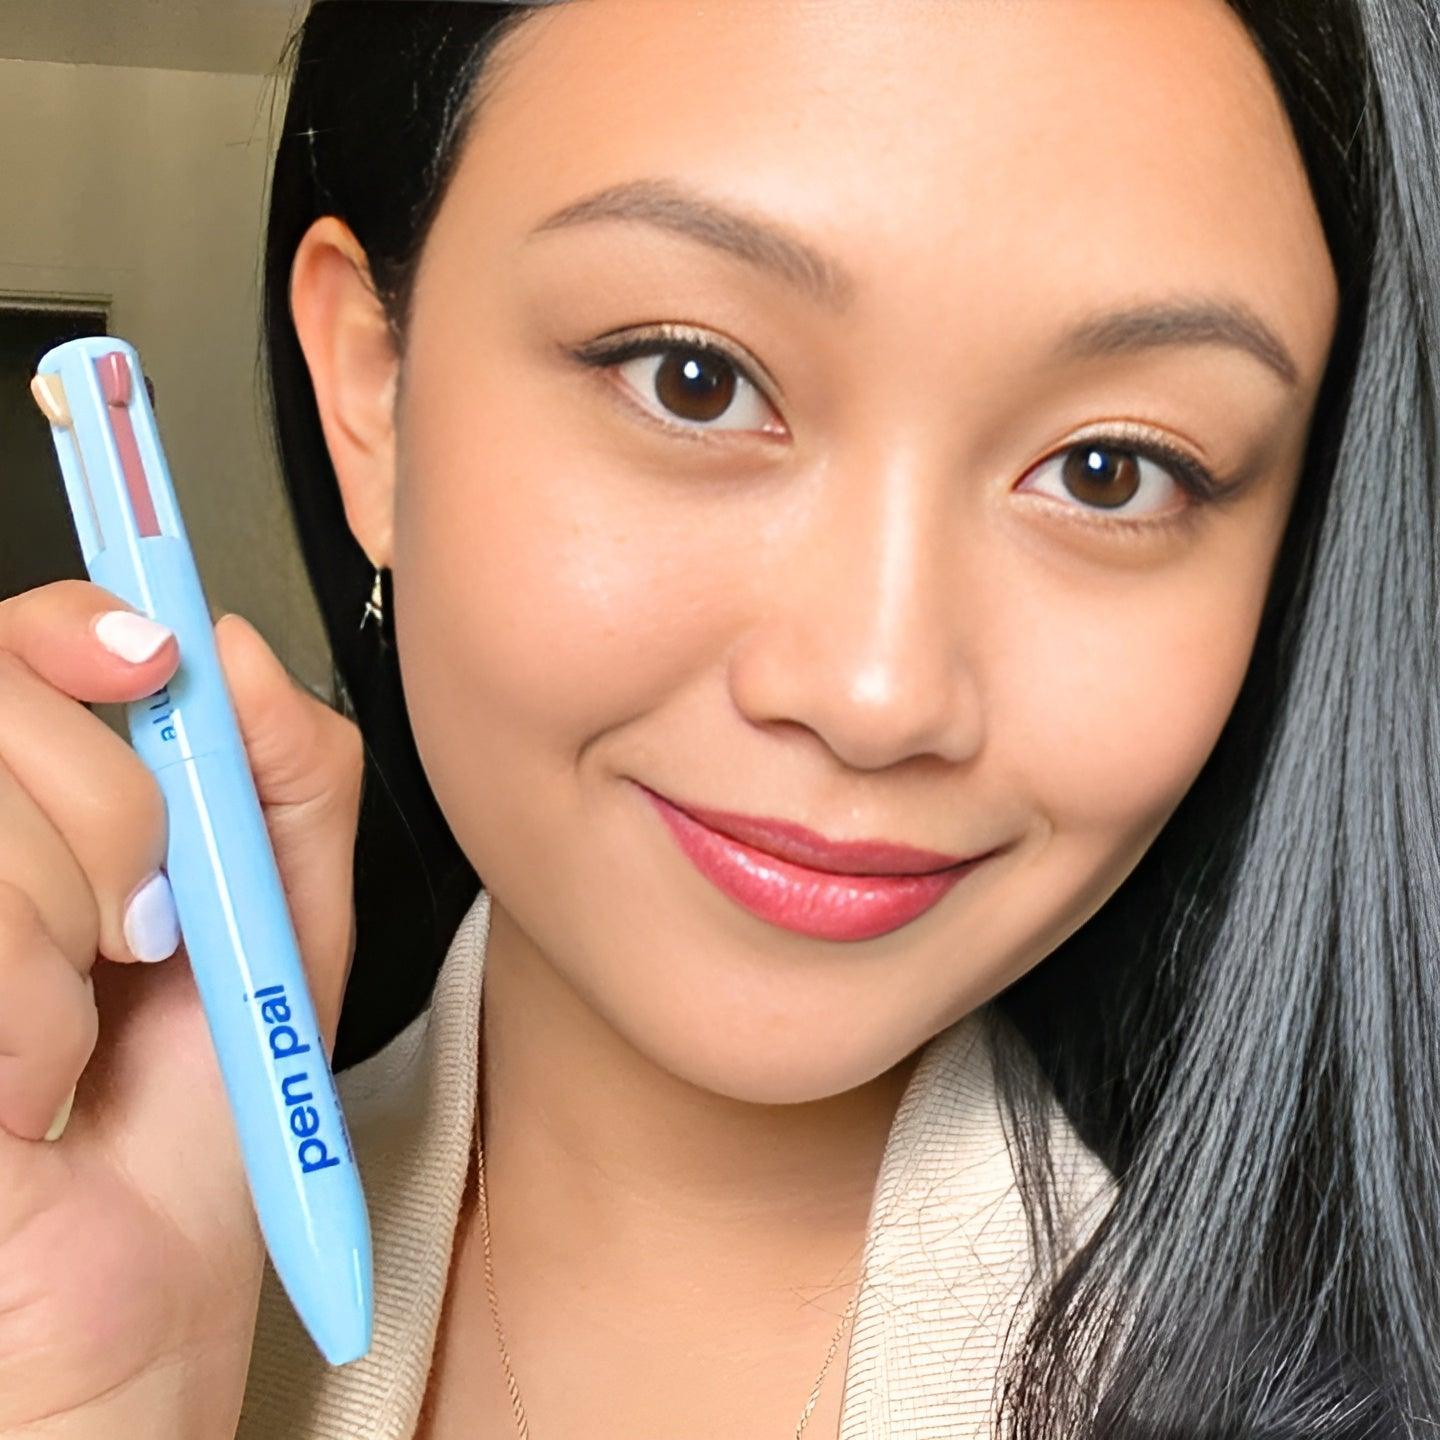 GlamPen™ - 4-In-1 Touch Up Makeup Pen (EYE LINER, BROW LINER, LIP LINER, & HIGHLIGHTER) - Health, Wellness & Beauty Care - CozyBuys